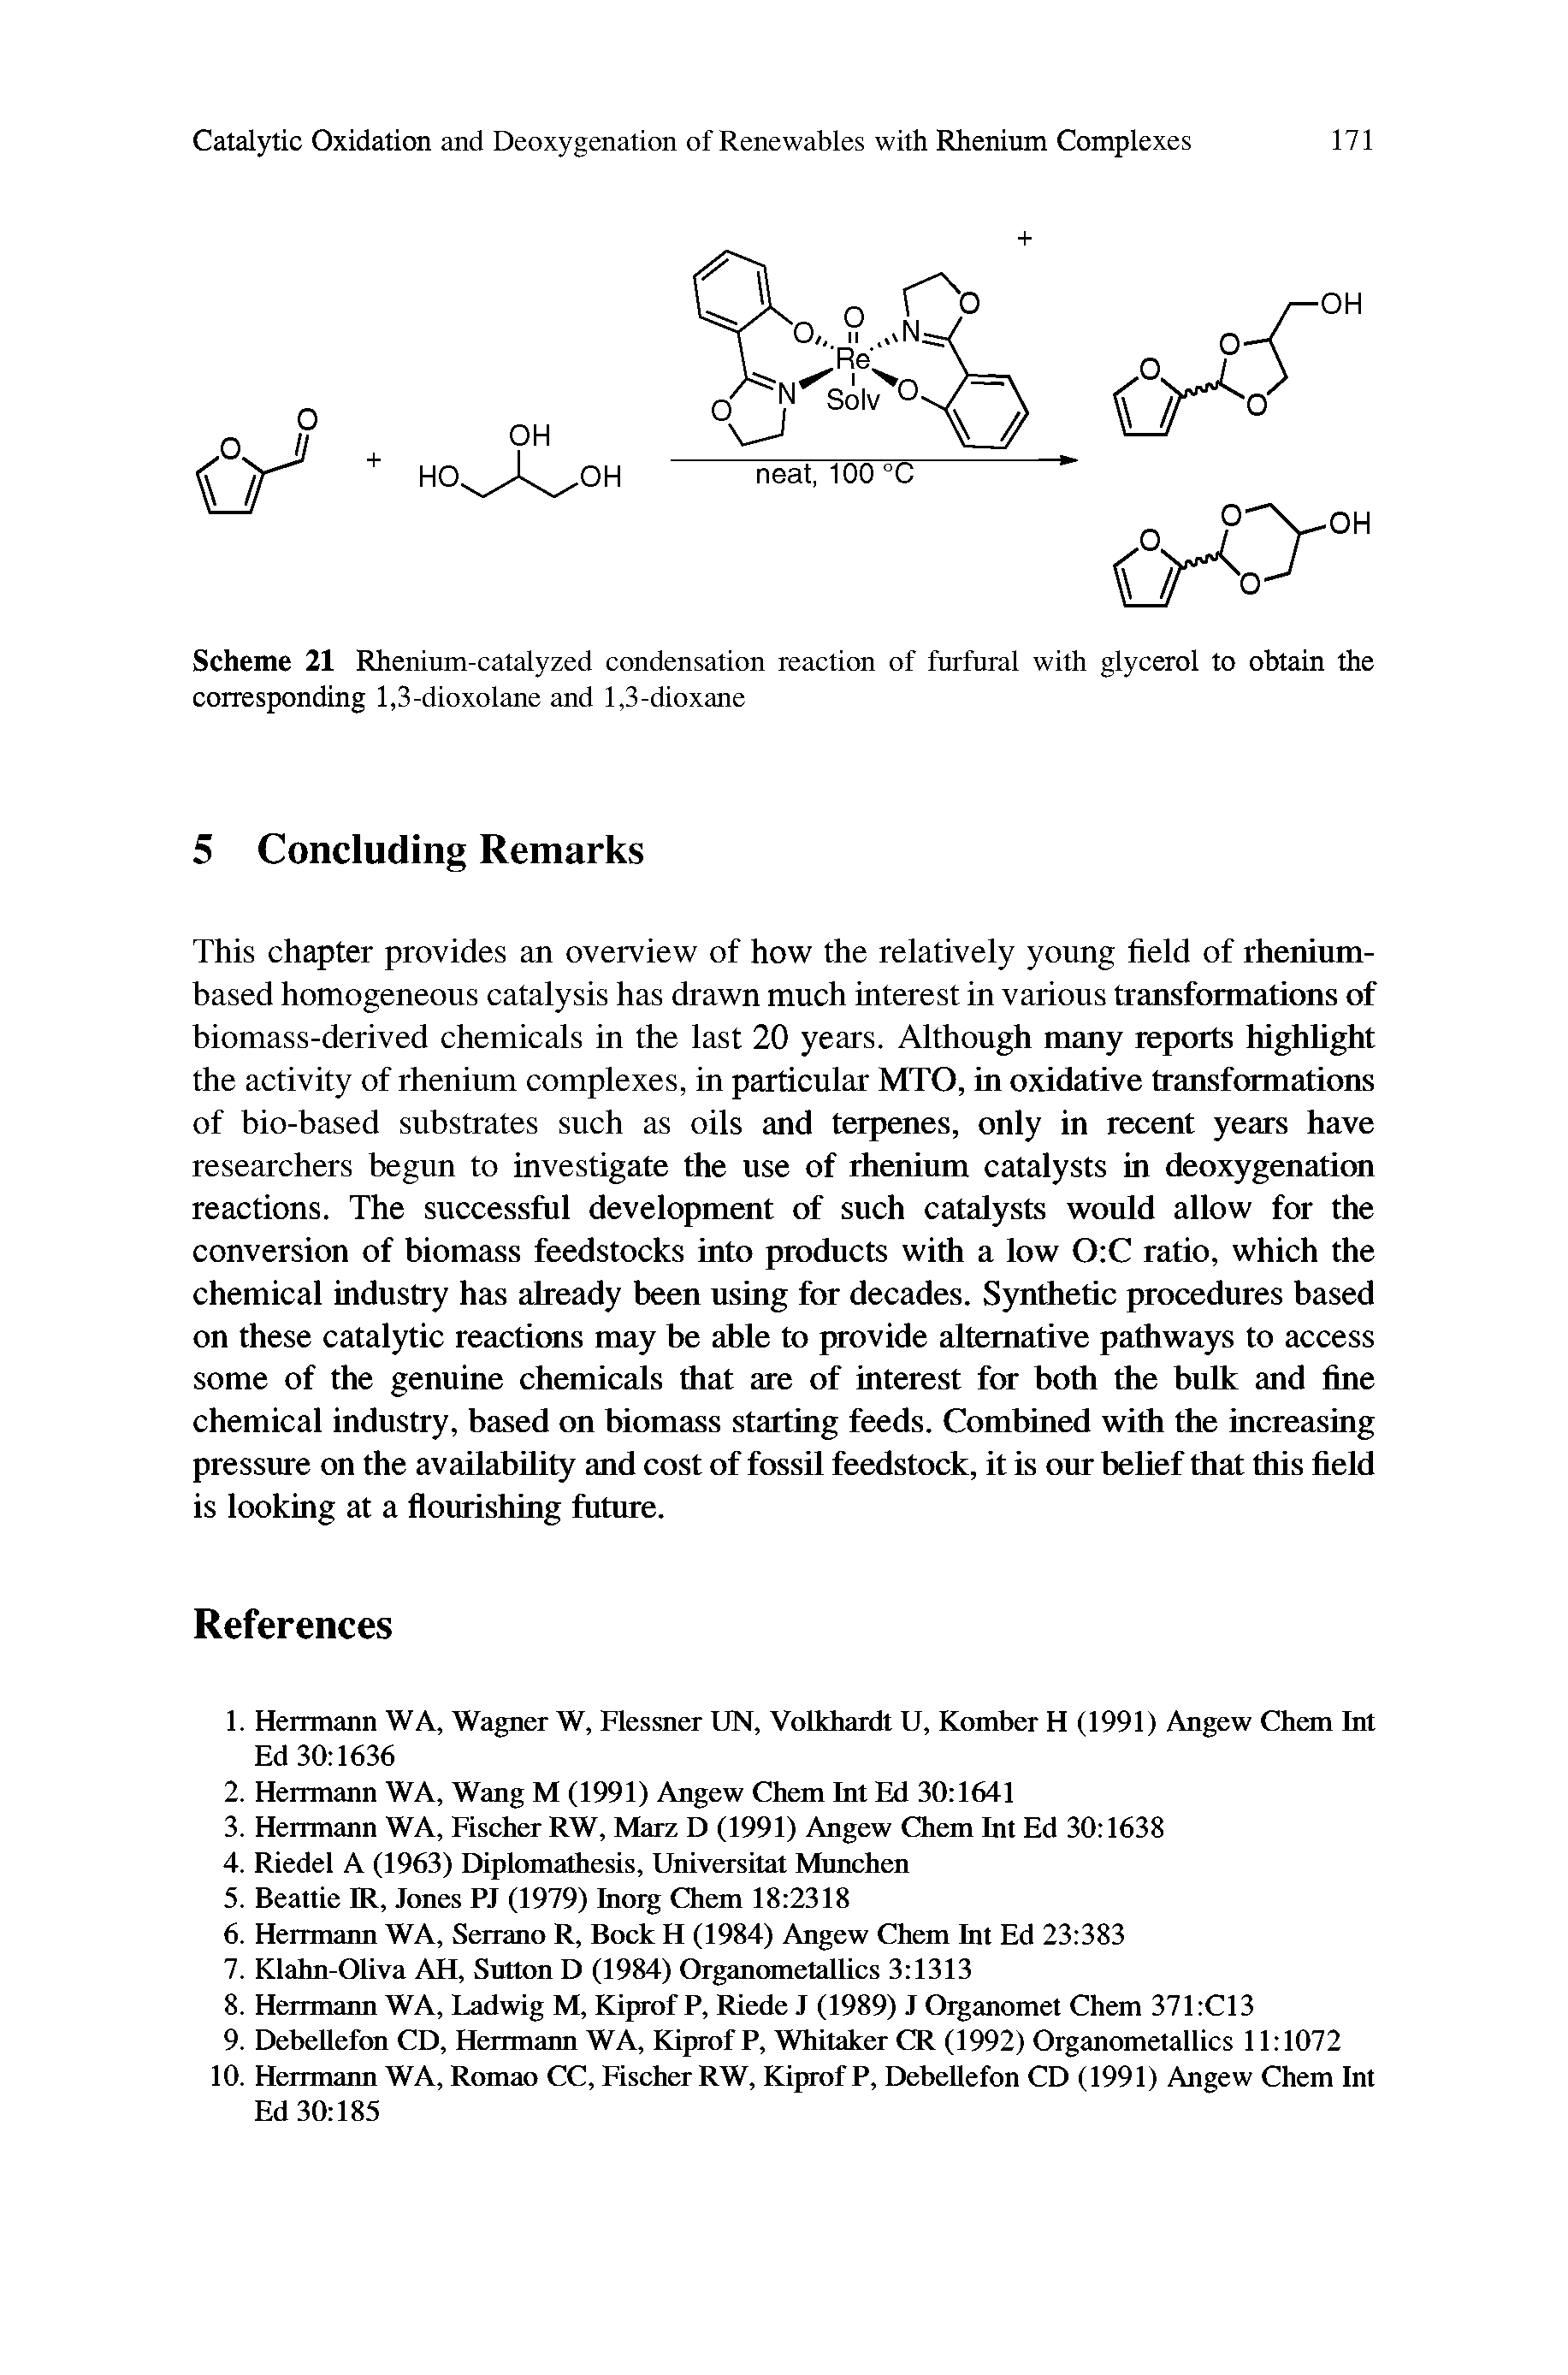 Scheme 21 Rhenium-catalyzed condensation reaction of furfural with glycerol to obtain the corresponding 1,3-dioxolane and 1,3-dioxane...